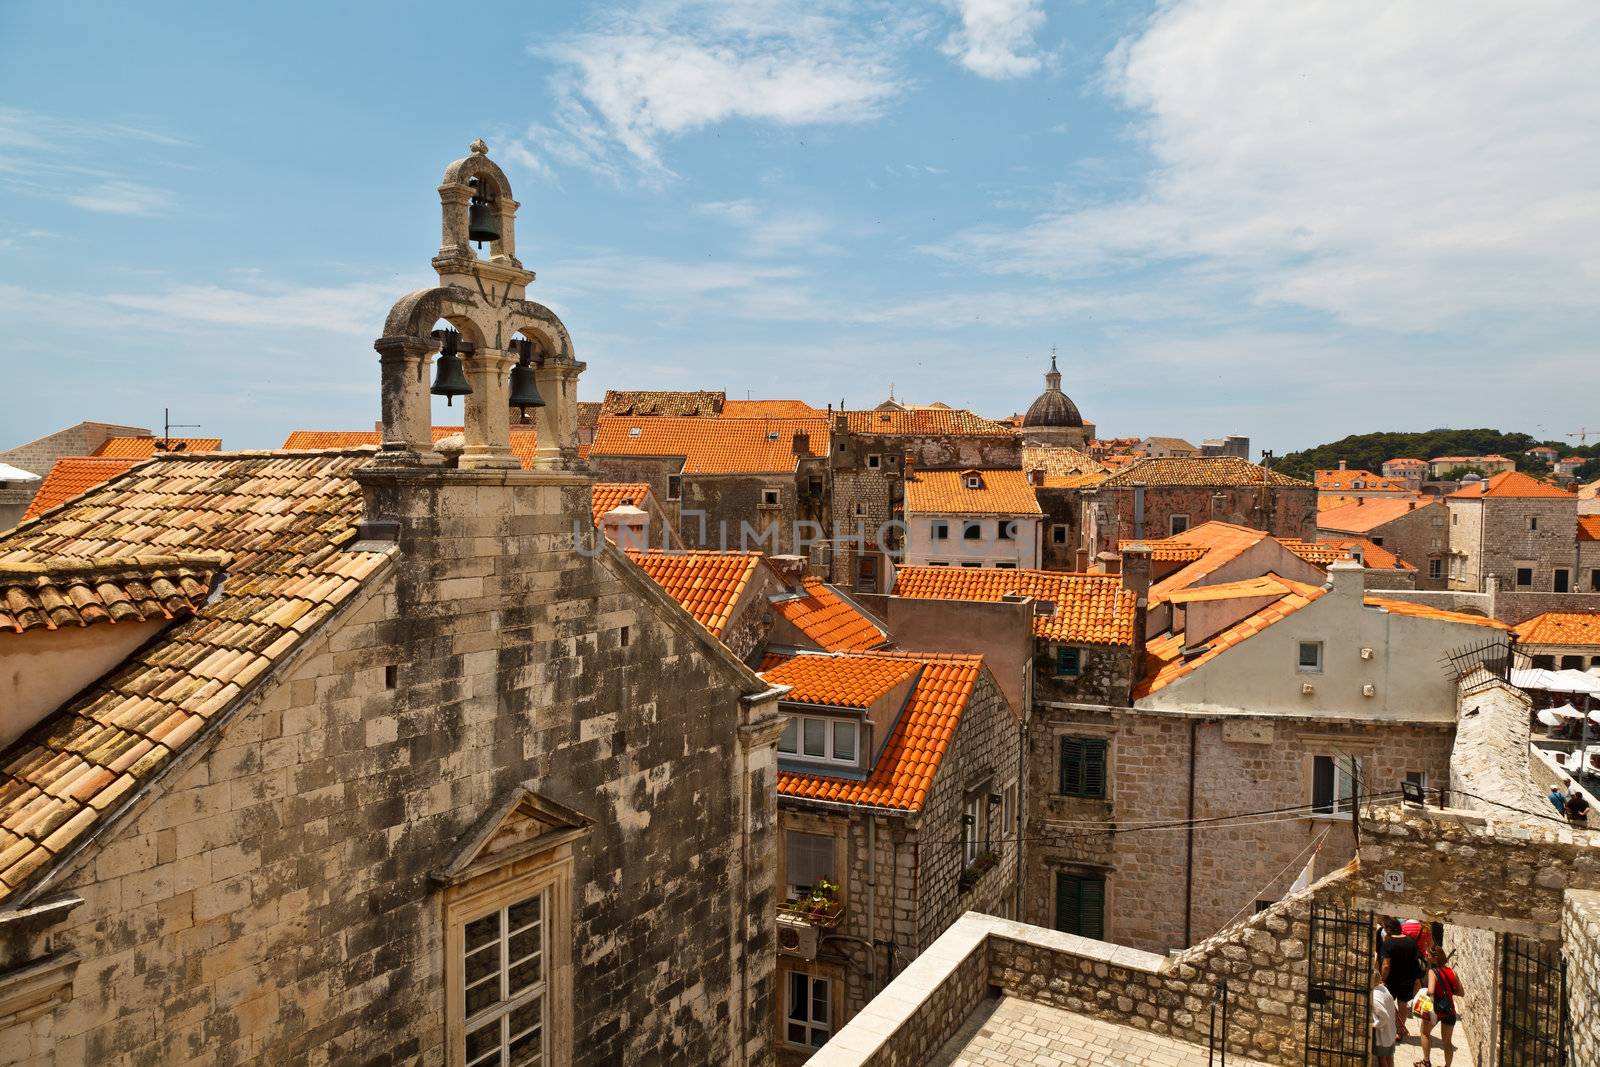 View of Dubrovnik Rooftops from the City Walls, Croatia